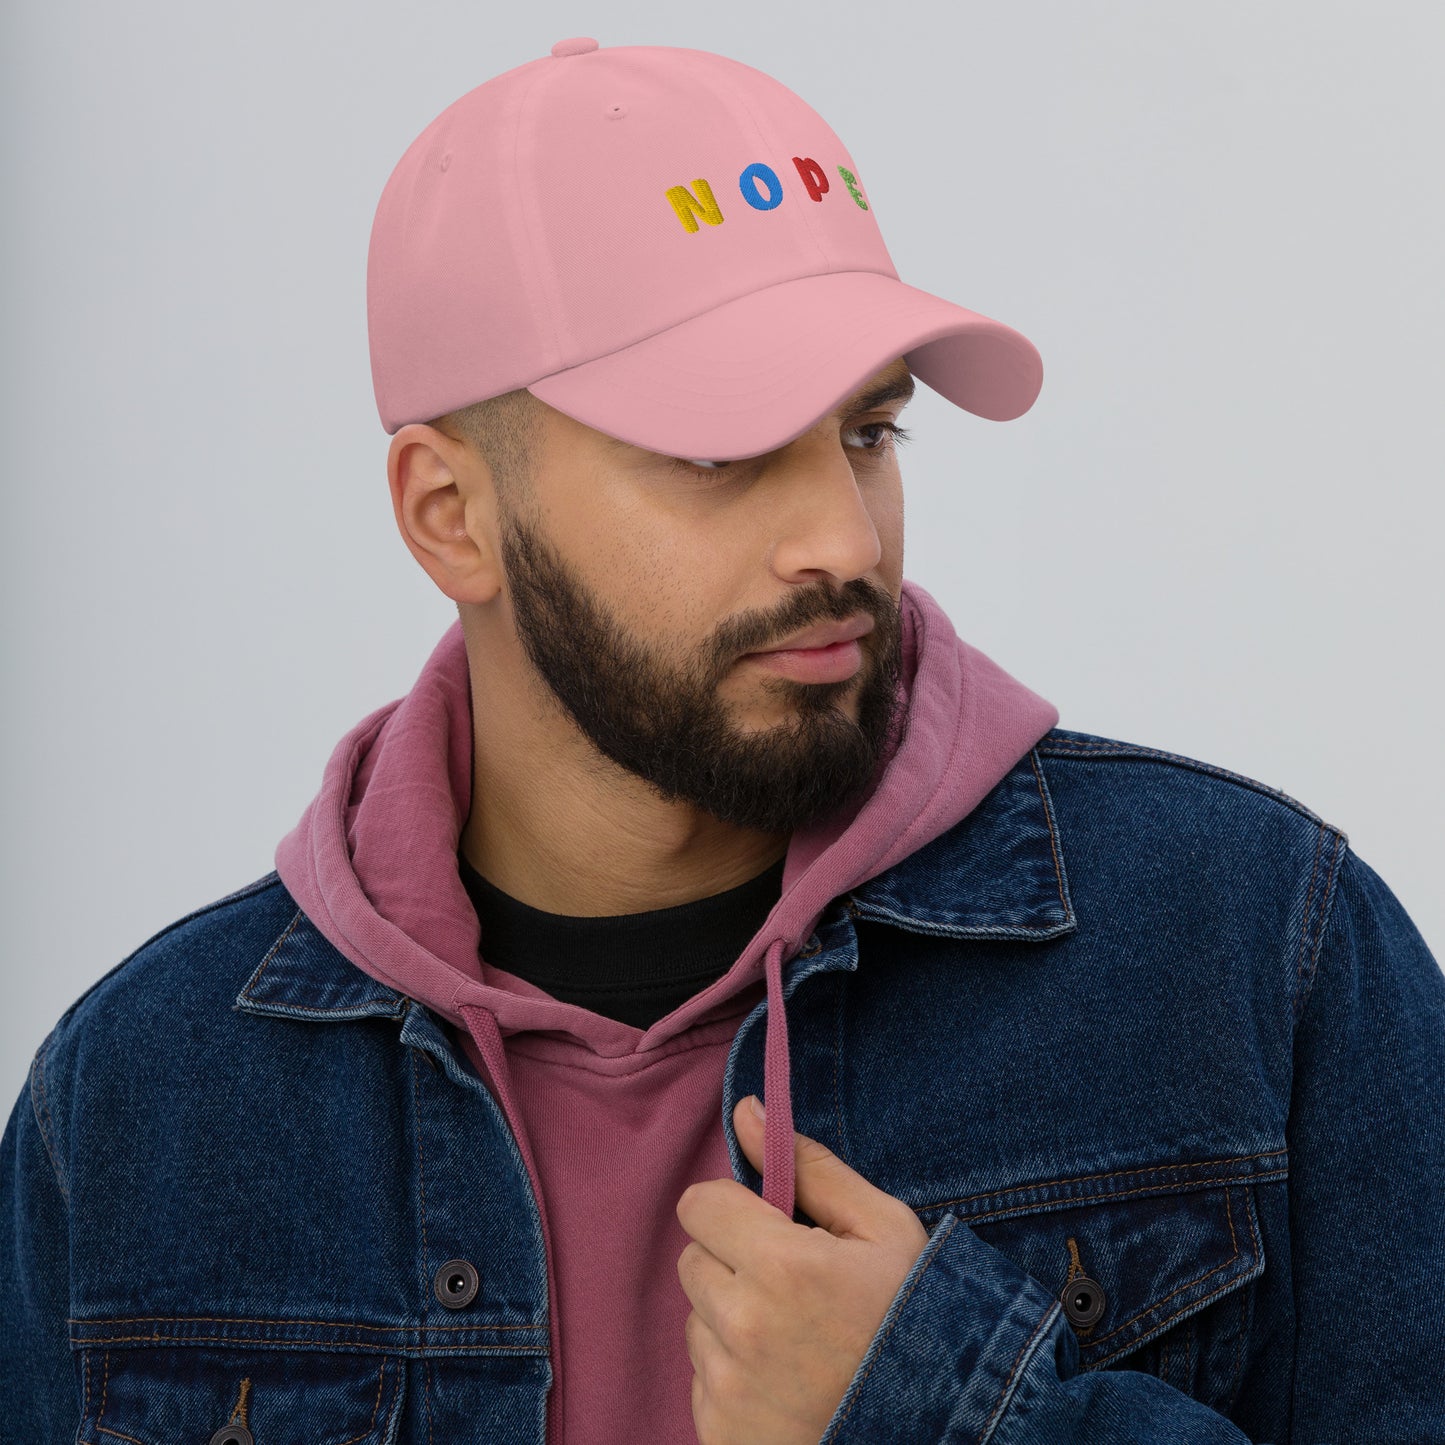 Embroidered Multi-Color "NOPE" Dad Hat - Available in Black, Navy, Pink, and White